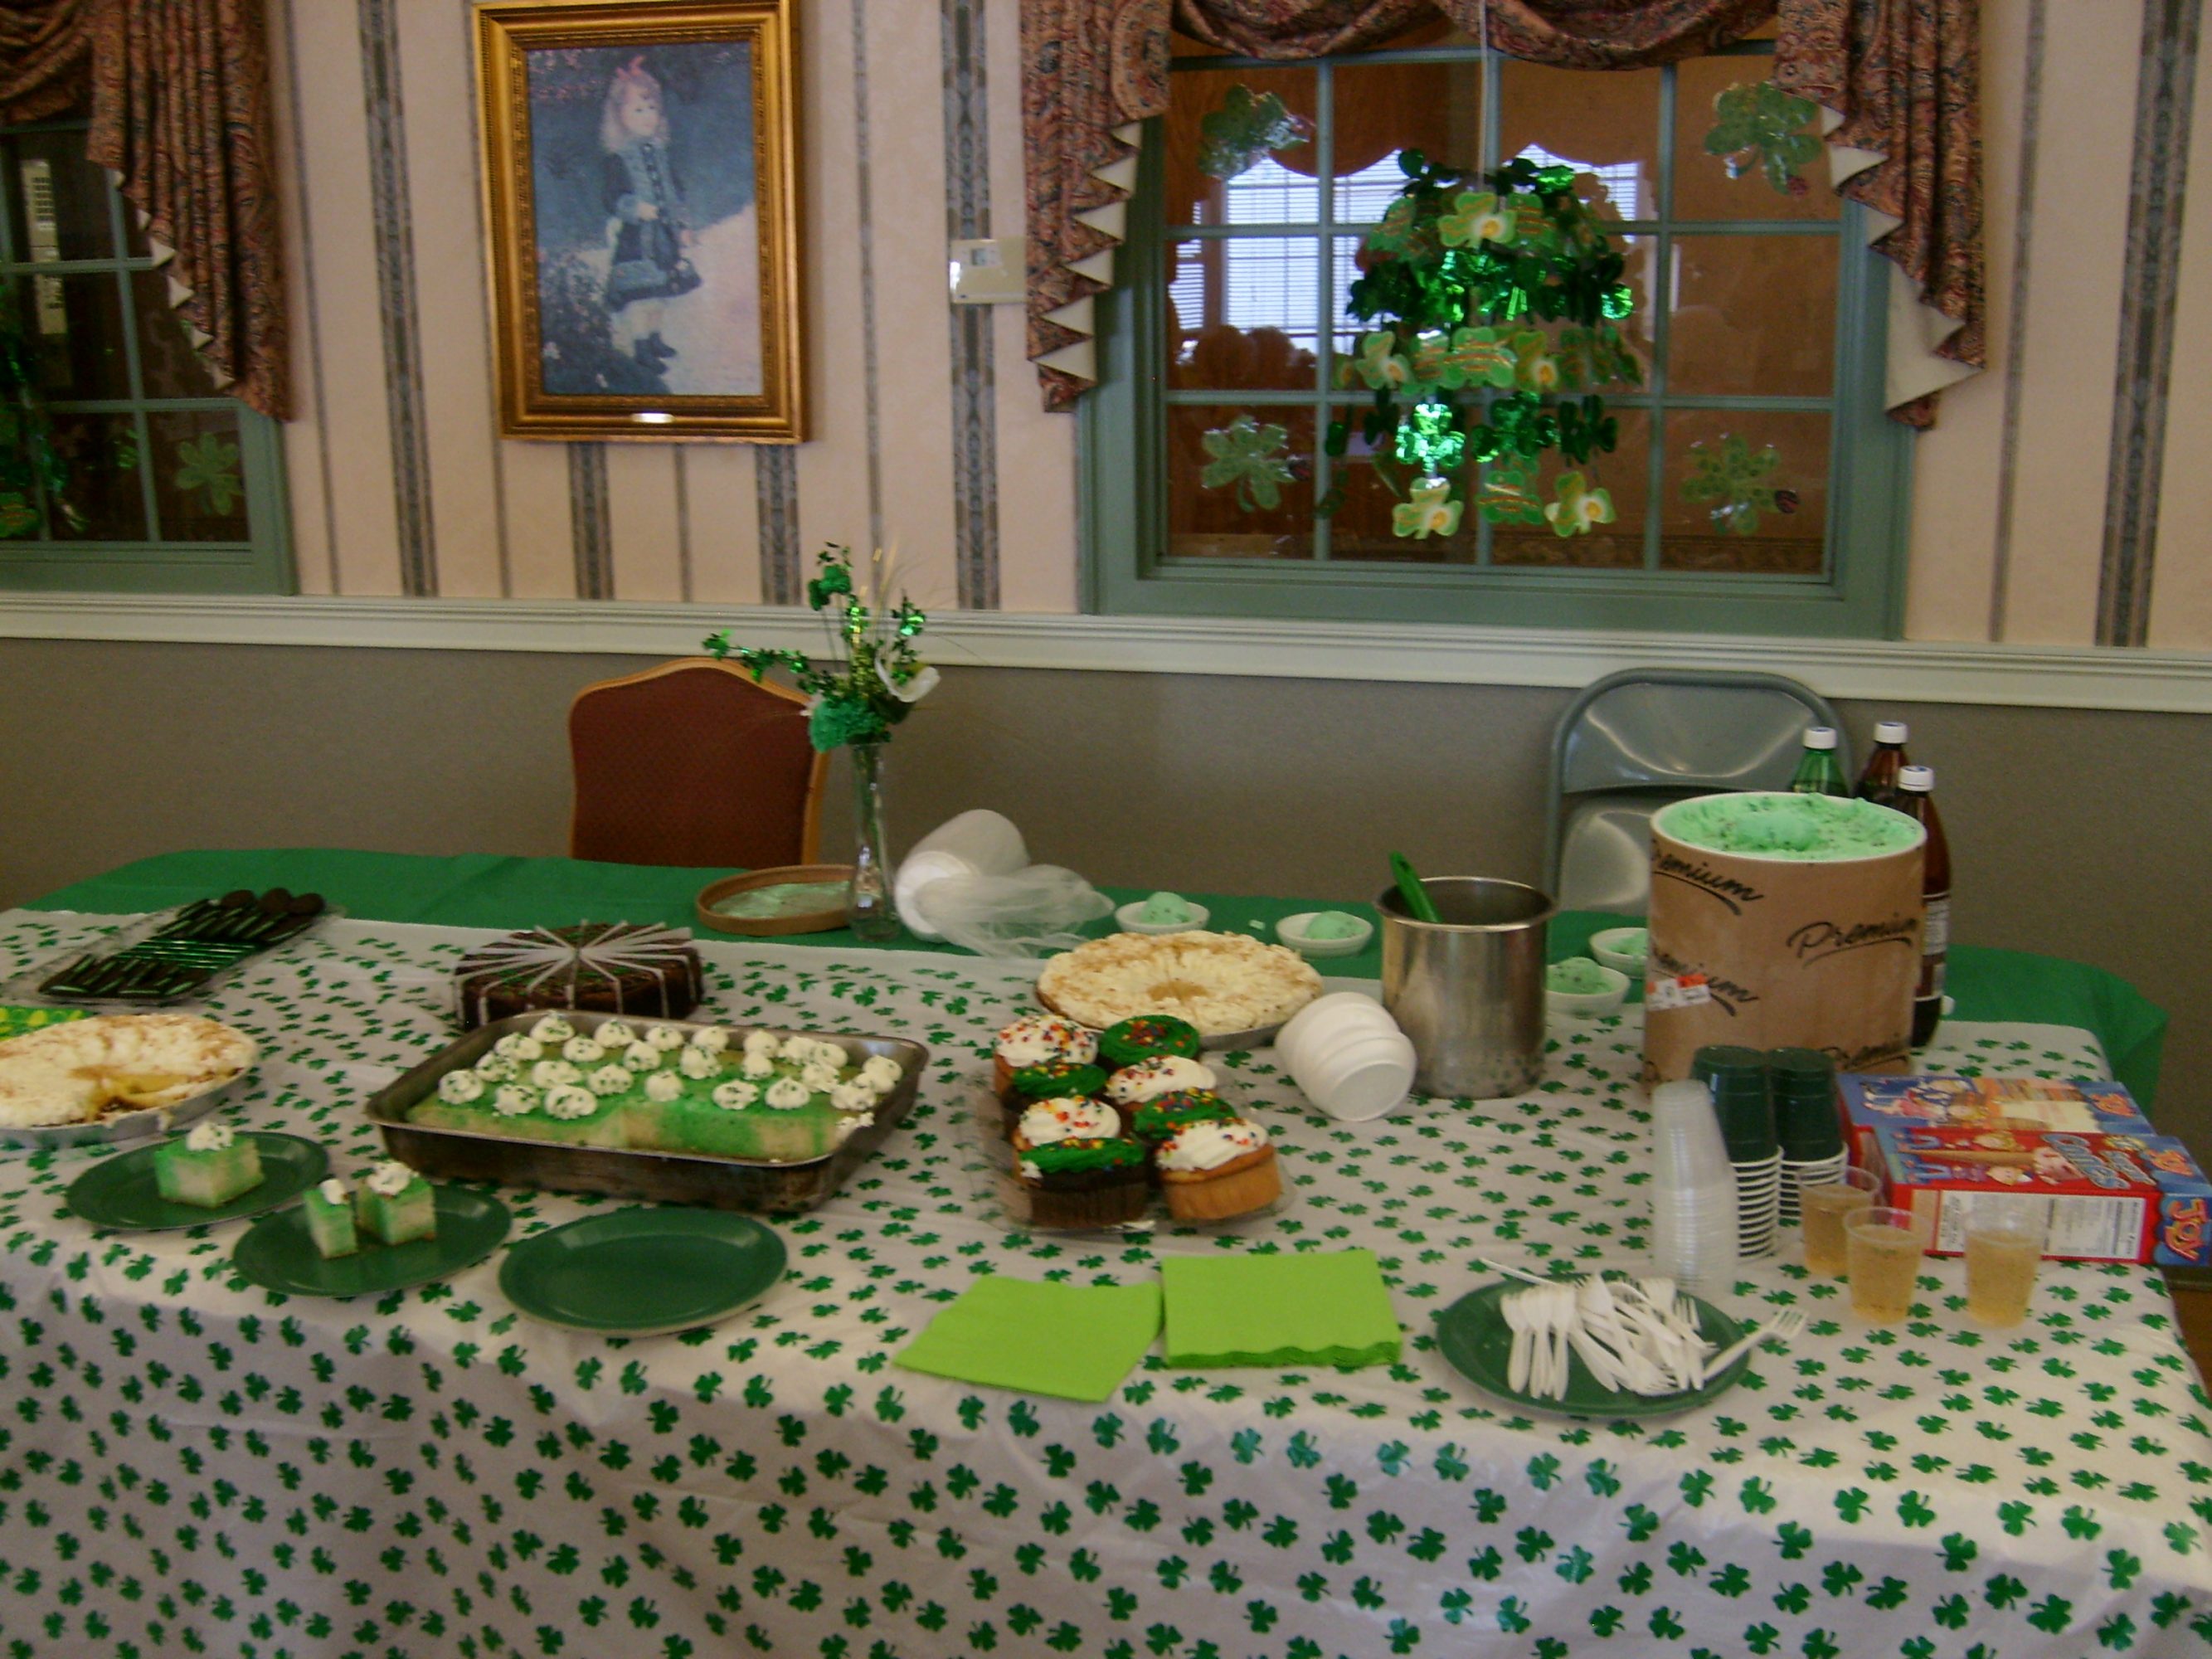 Table all set for St. Paddy's social